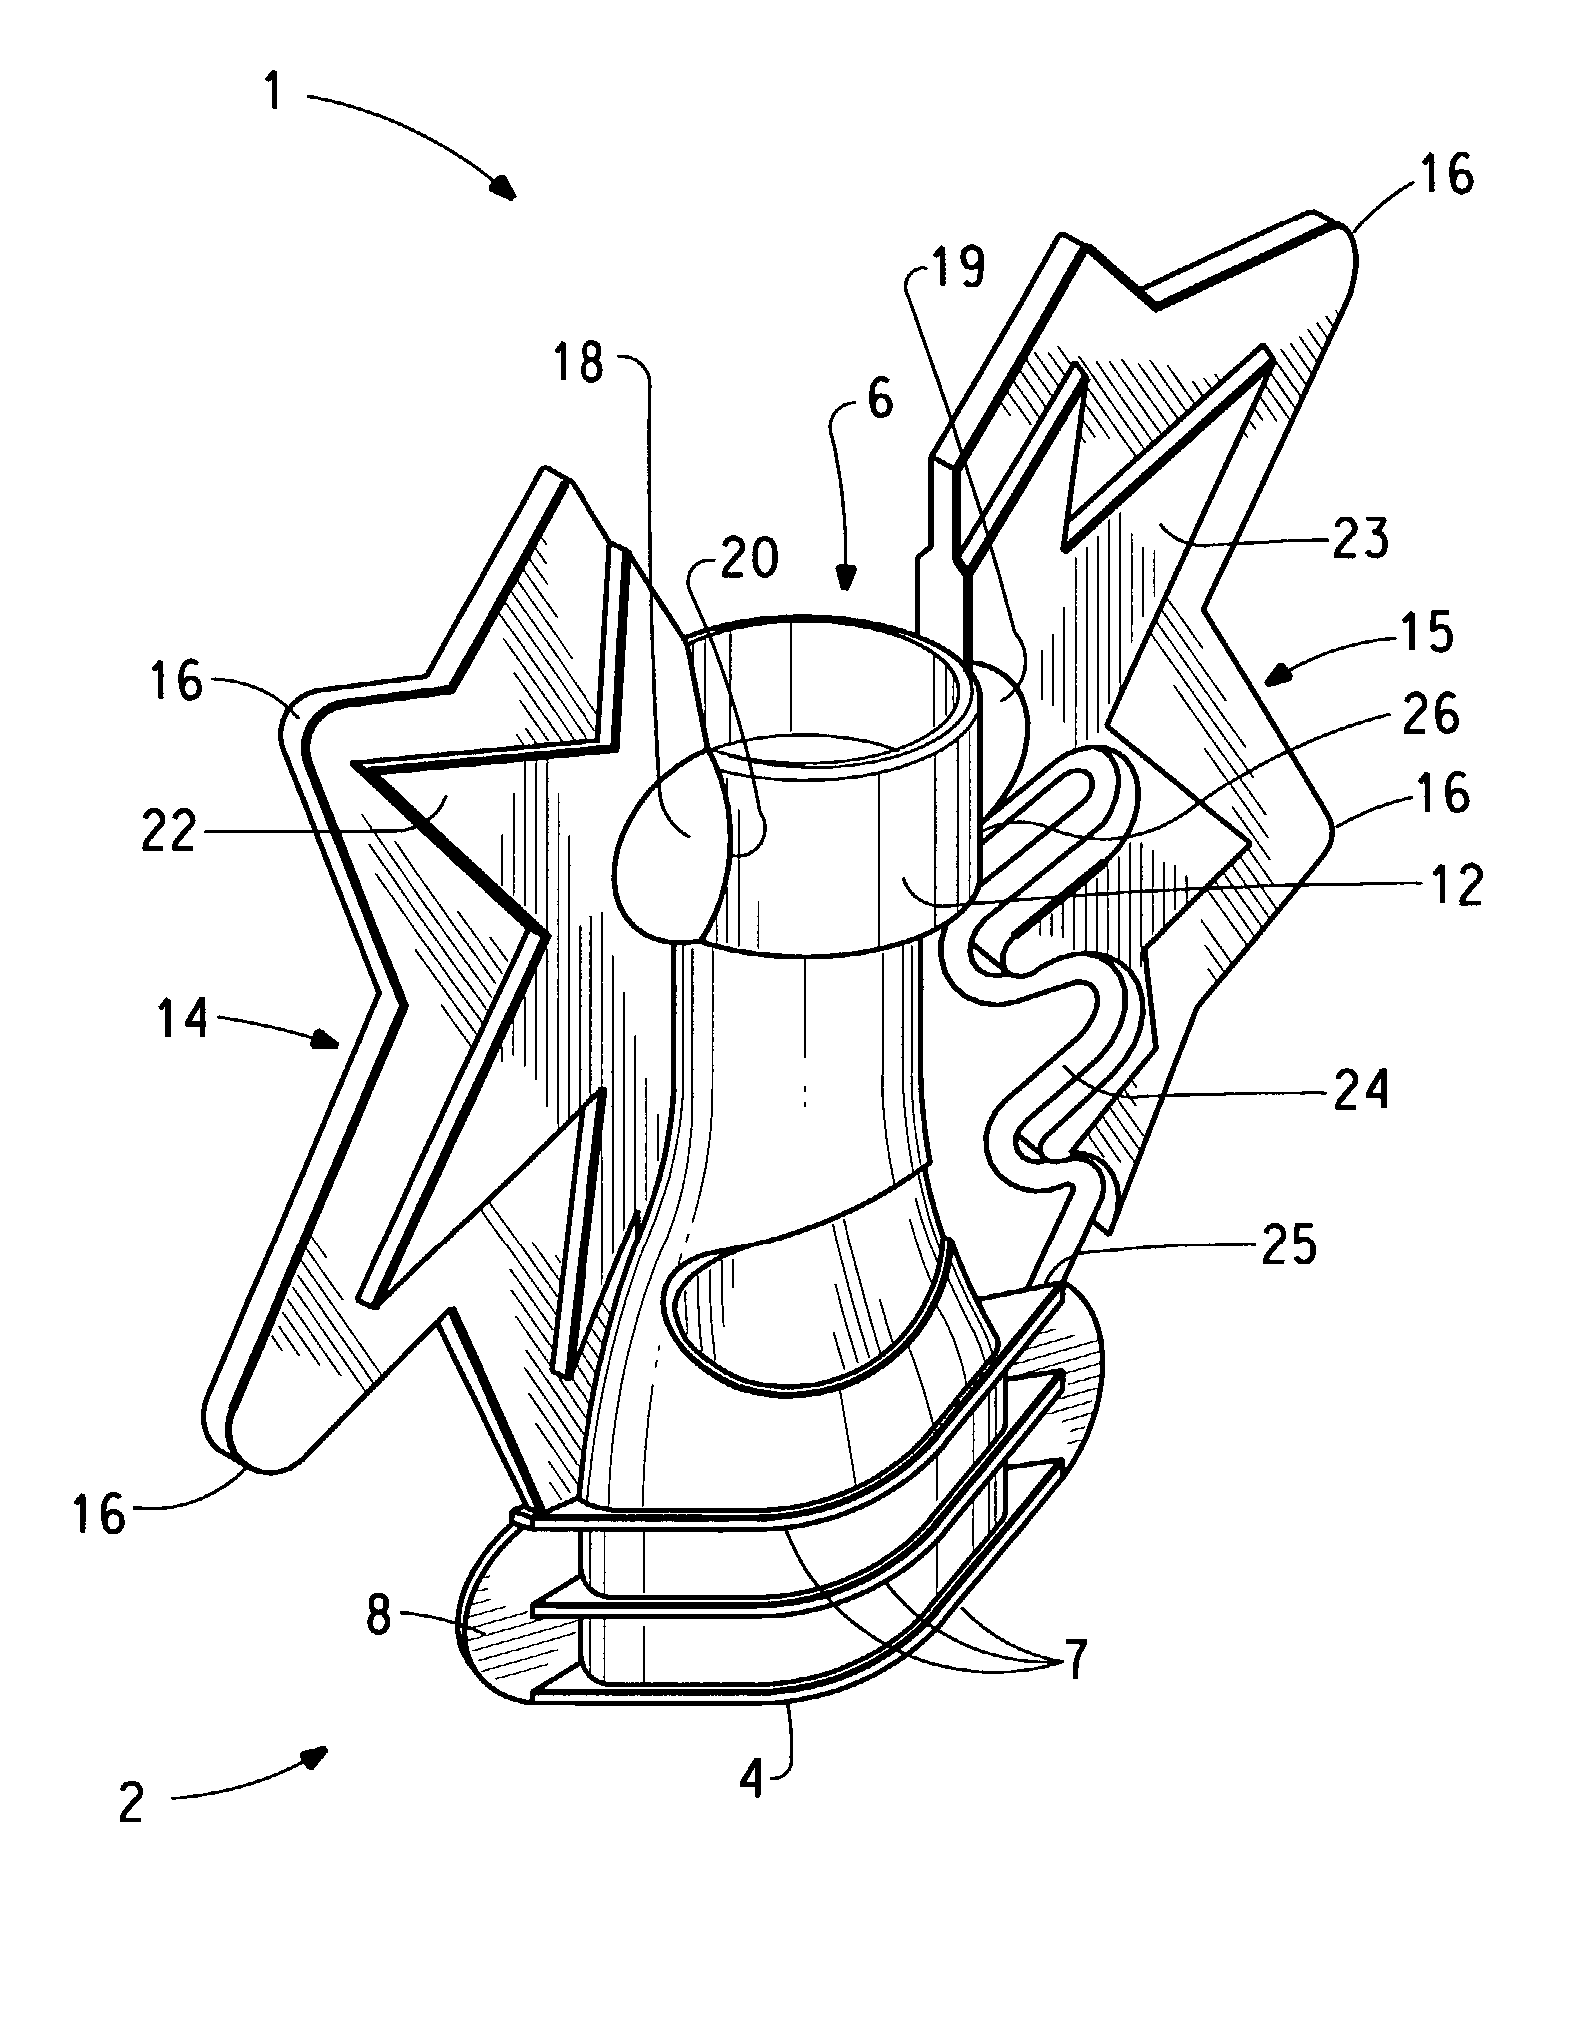 Fitment for a flexible pouch with child-safety properties